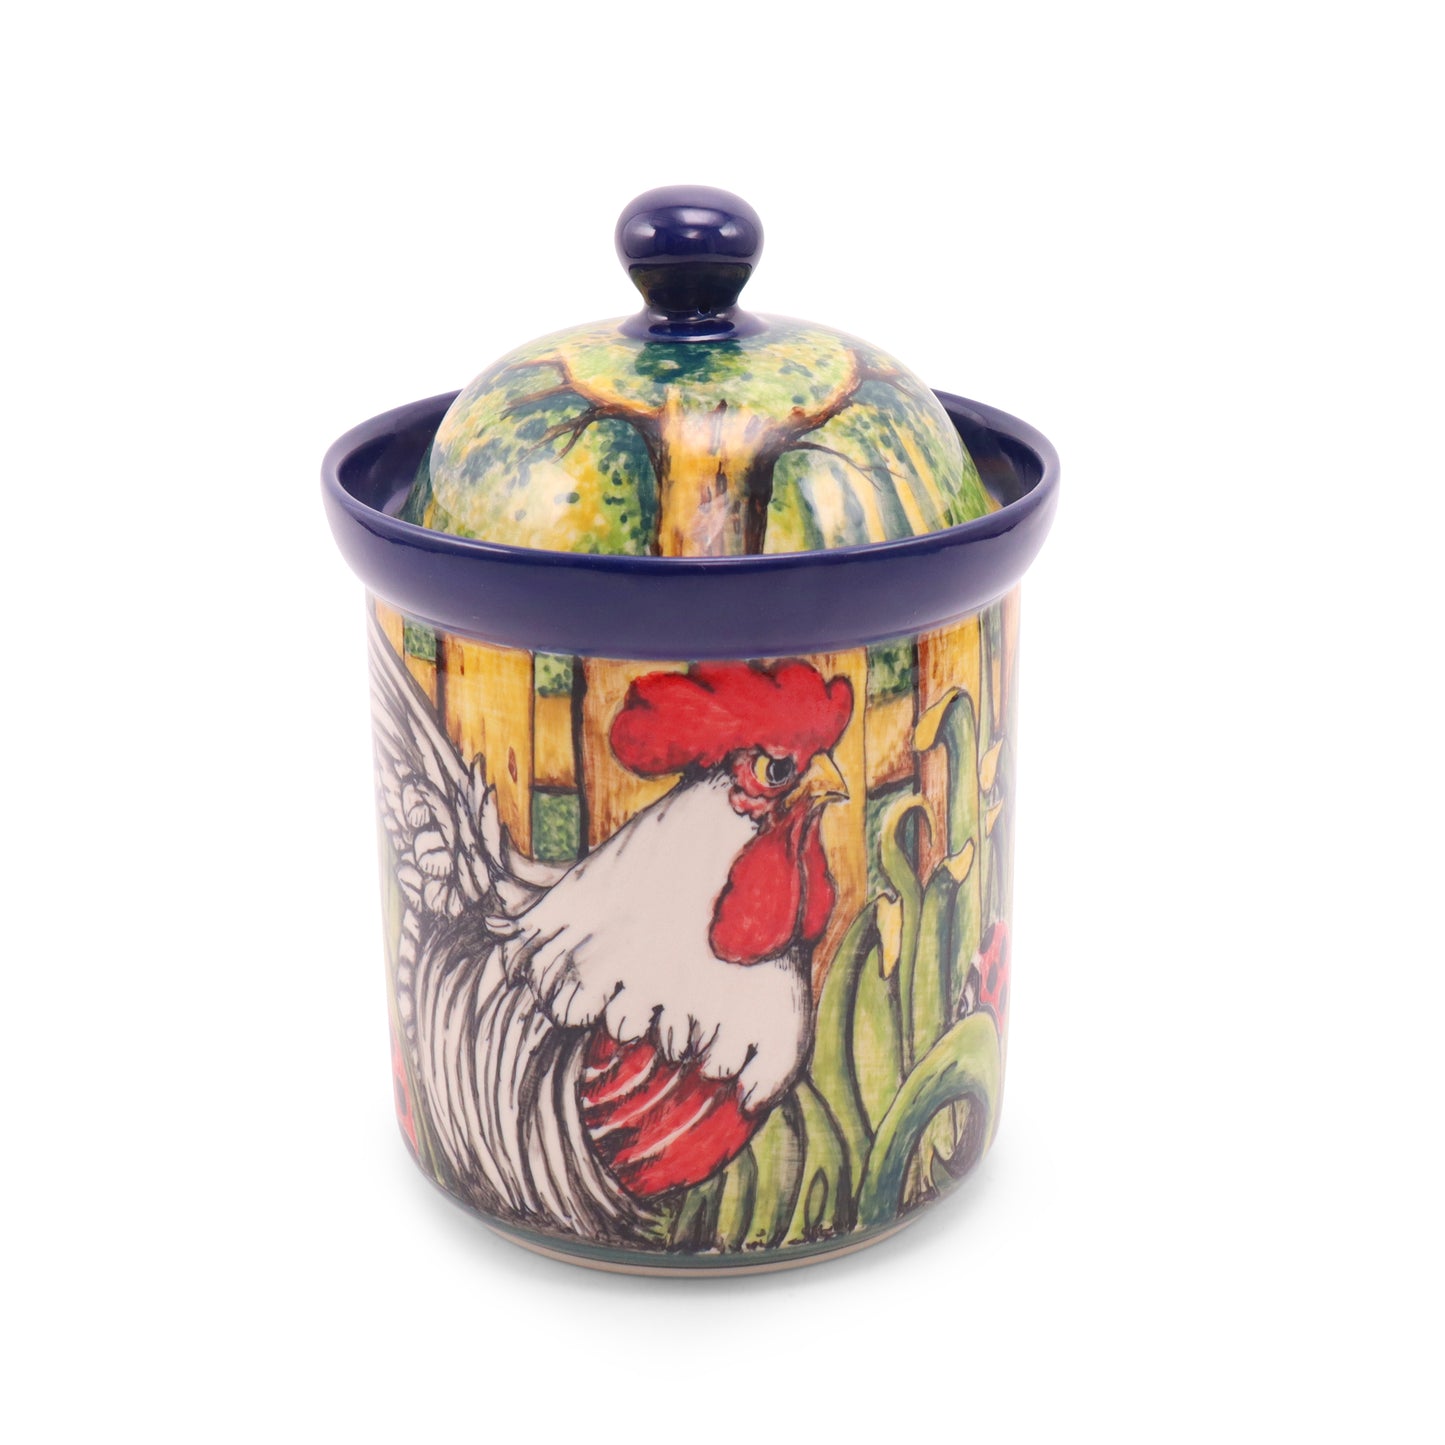 5"x8" Covered Canister. Pattern: Rooster 2